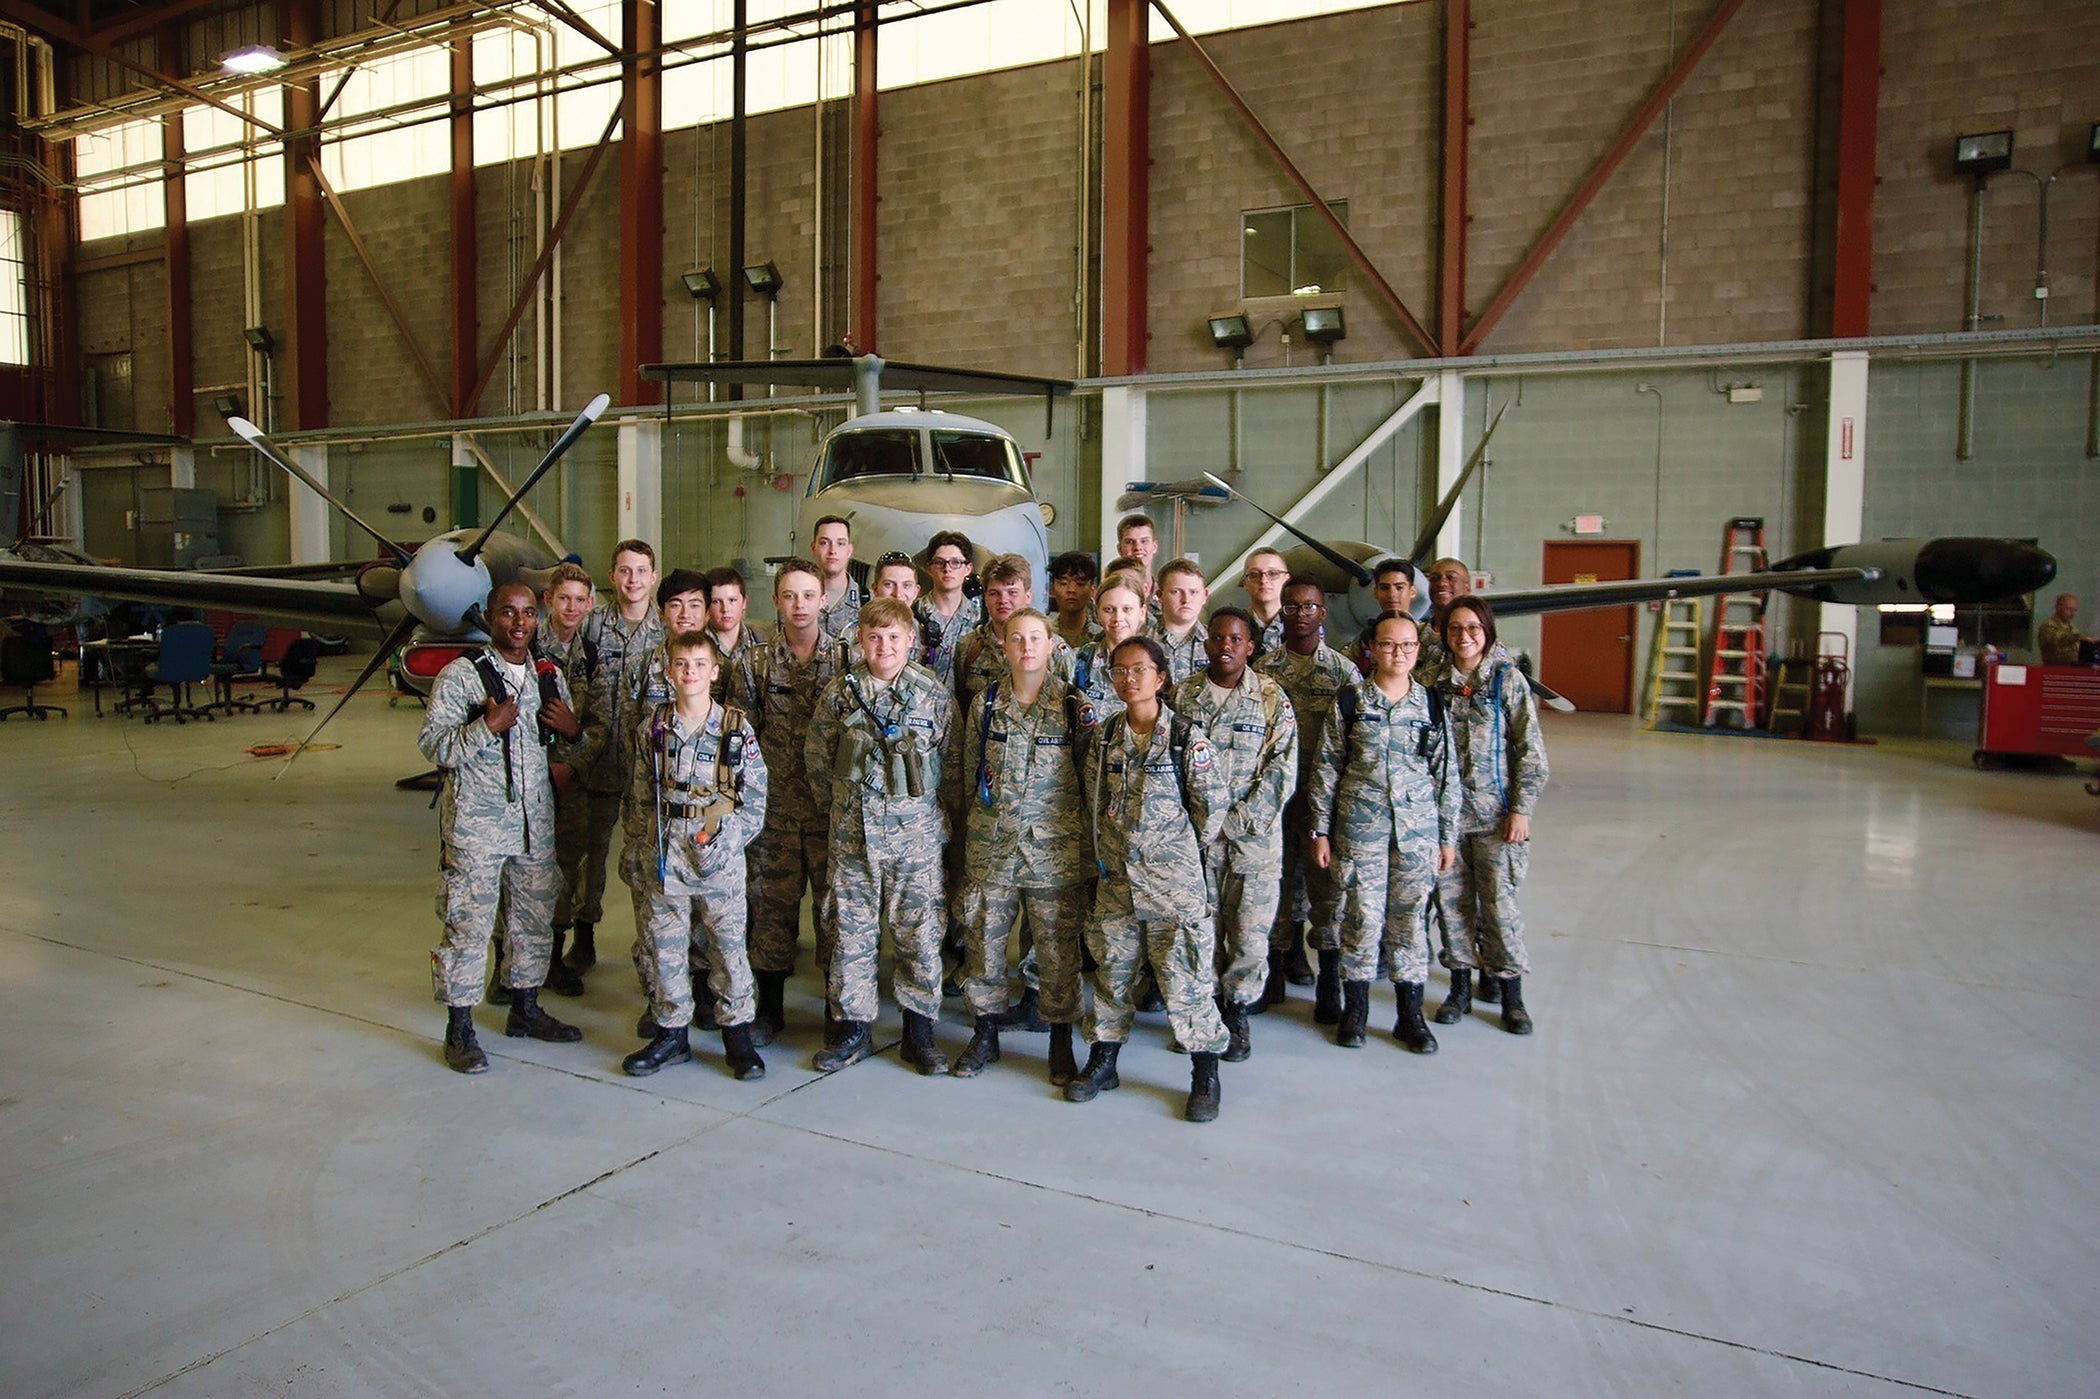 Civil Air Patrol cadets visit Sierra Municipal Vista Airport, Arizona, to learn about different types of aircraft. (Credit: Civil Air Patrol/2nd Lt. Mitch Smith)